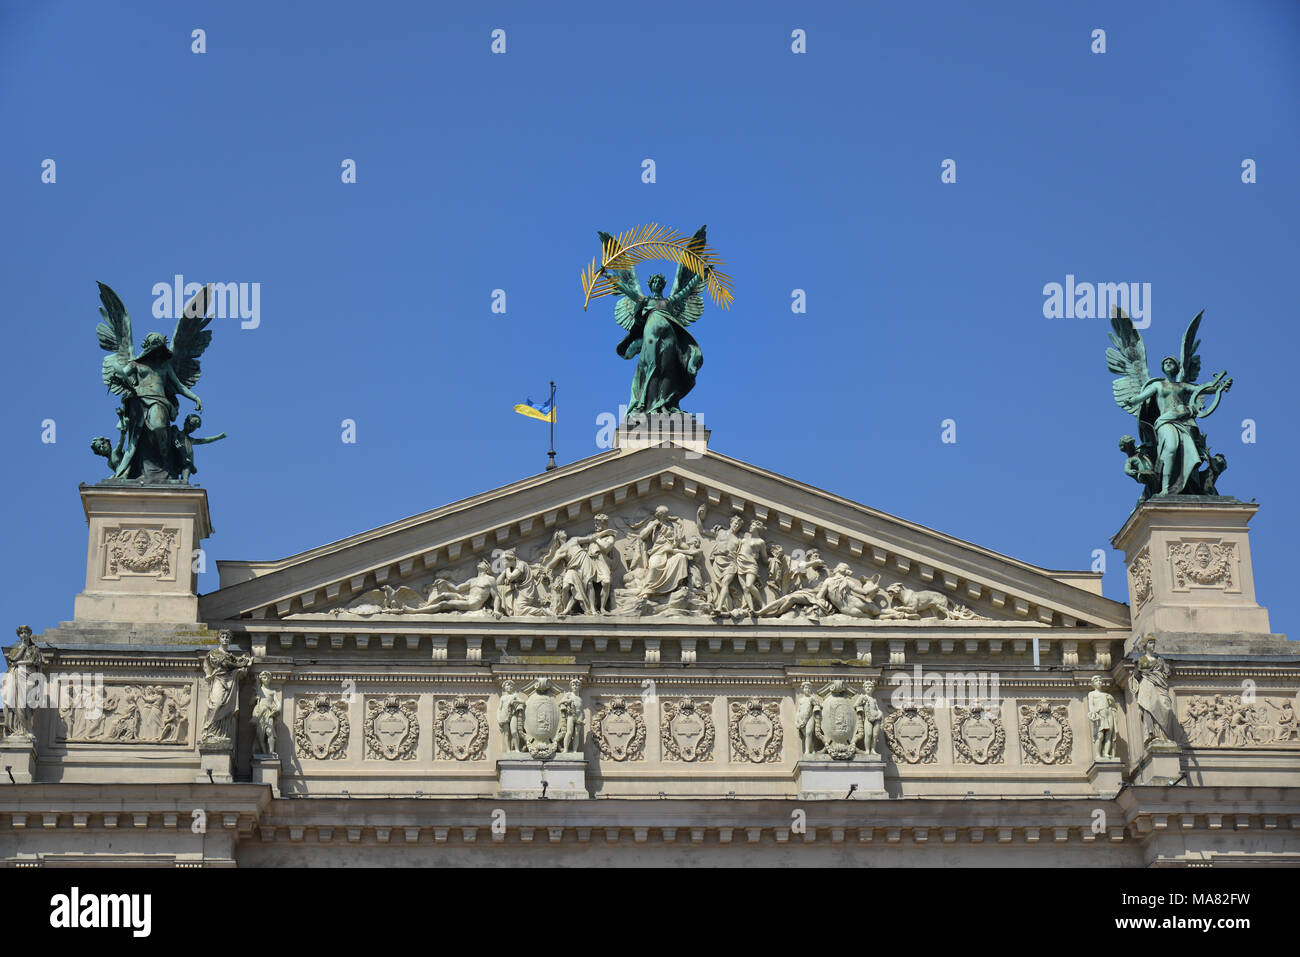 The famous Solomiya Krushelnytska Opera in Lviv with the statue of glory on a perfect summer day. Stock Photo